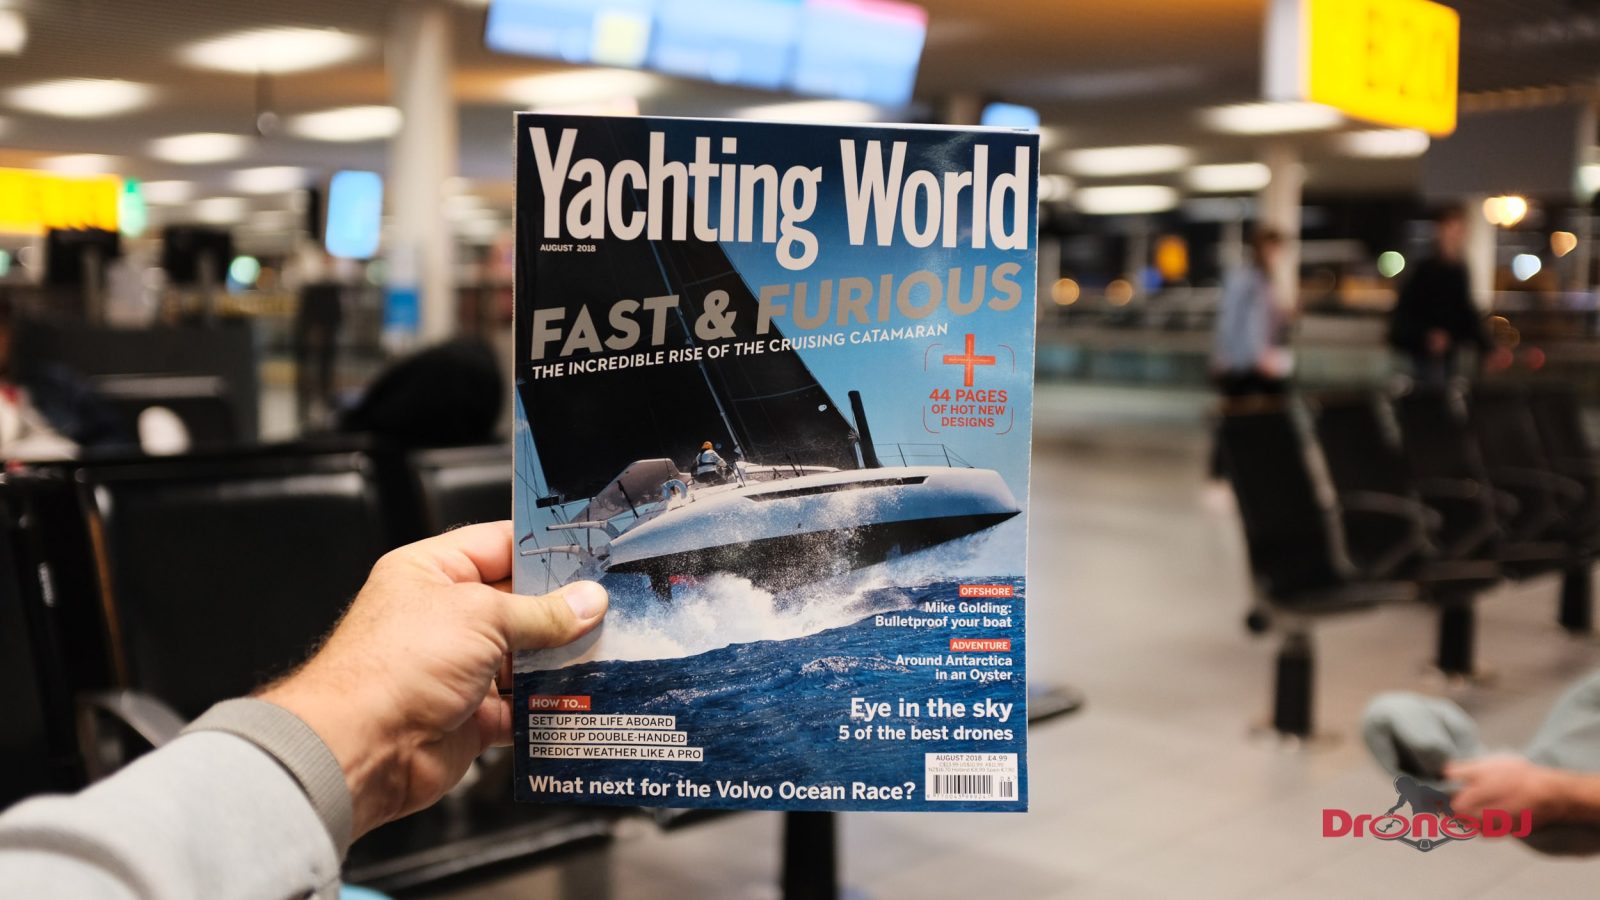 Yachting World recommends five of the best drones but leaves out the DJI Mavic Air and Parrot Anafi but includes the Karma. Really?